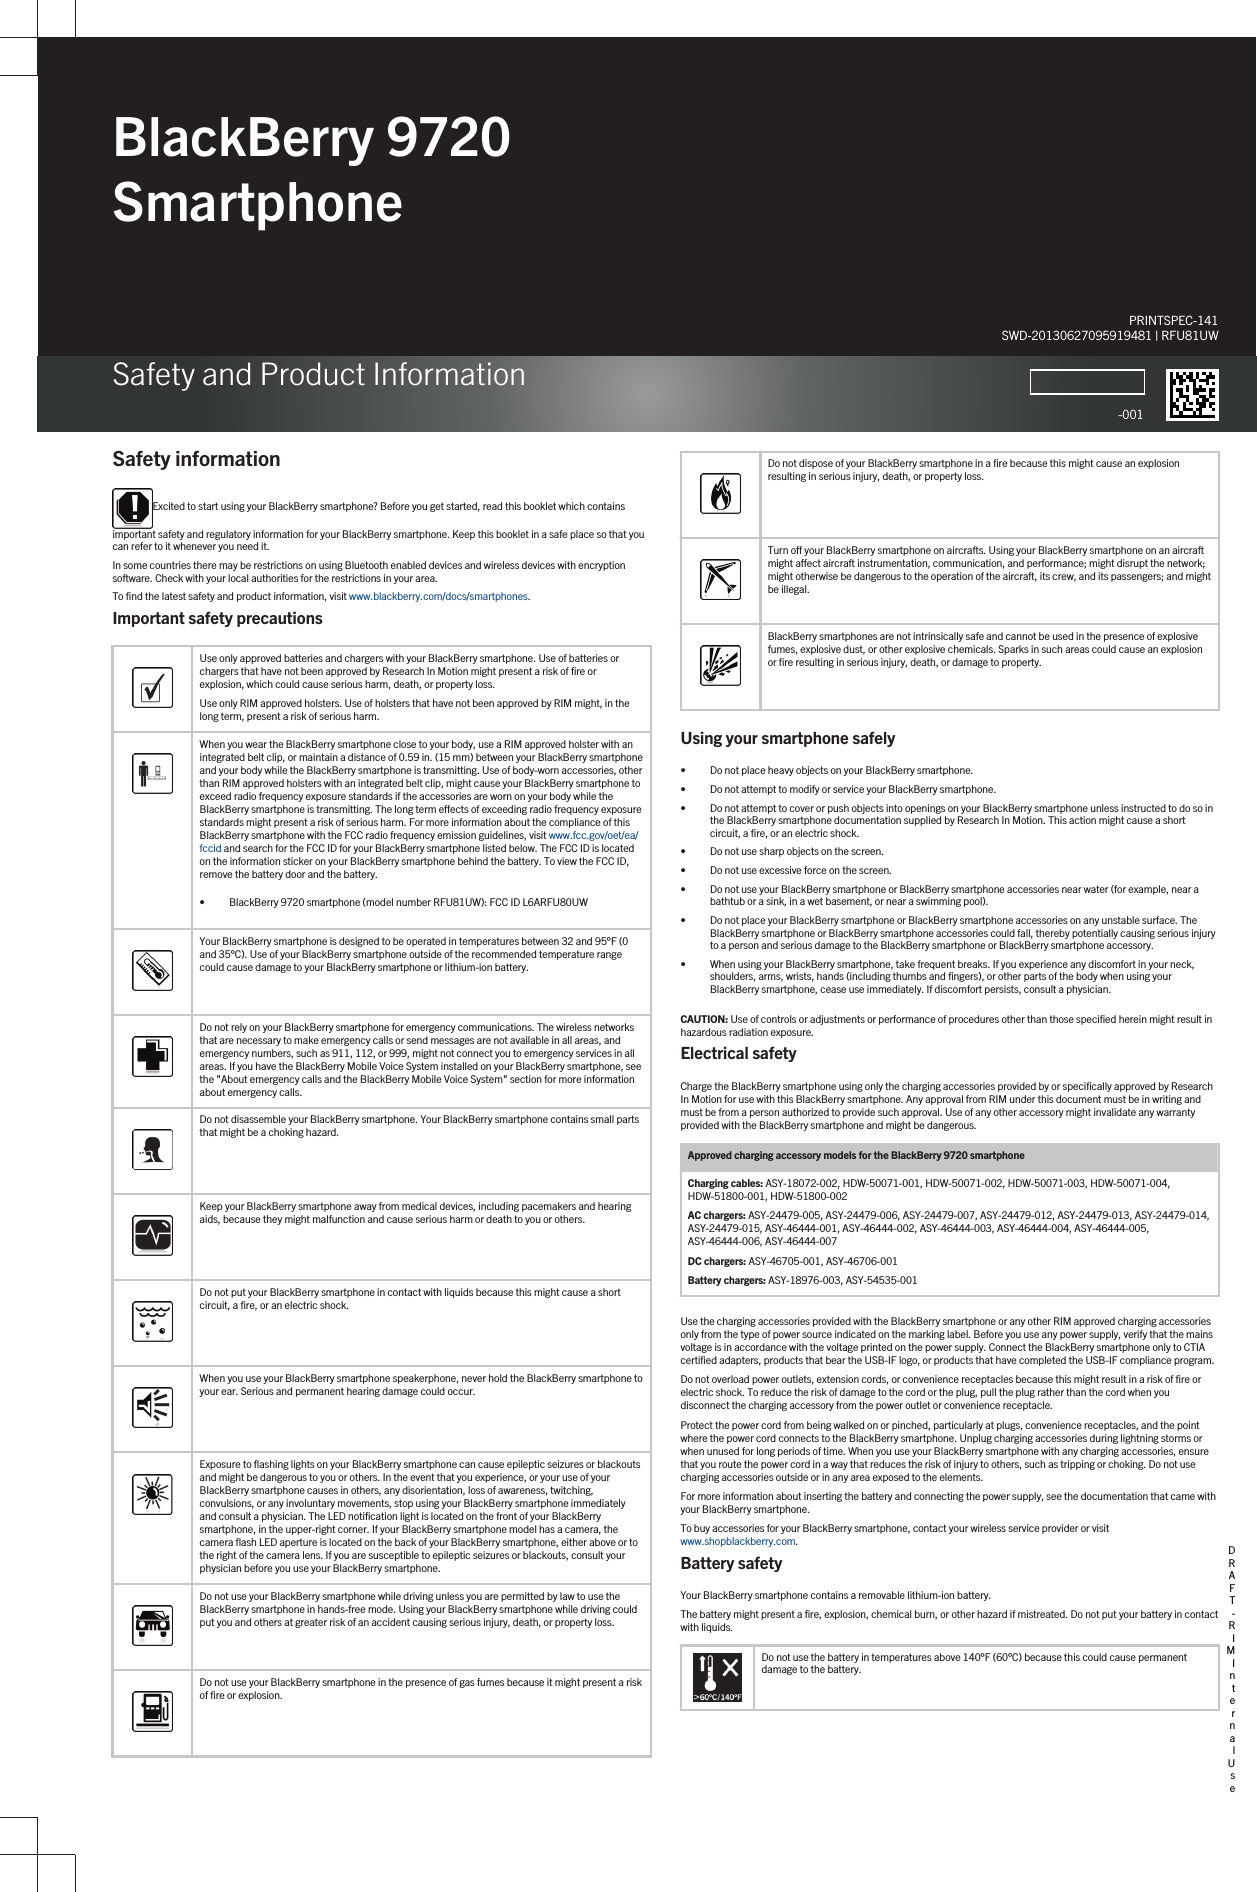 BlackBerry 9720 SmartphoneSafety and Product InformationPRINTSPEC-141SWD-20130627095919481 | RFU81UW-001Safety informationExcited to start using your BlackBerry smartphone? Before you get started, read this booklet which contains important safety and regulatory information for your BlackBerry smartphone. Keep this booklet in a safe place so that you can refer to it whenever you need it.In some countries there may be restrictions on using Bluetooth enabled devices and wireless devices with encryption software. Check with your local authorities for the restrictions in your area.To find the latest safety and product information, visit www.blackberry.com/docs/smartphones.Important safety precautions  Use only approved batteries and chargers with your BlackBerry smartphone. Use of batteries or chargers that have not been approved by Research In Motion might present a risk of fire or explosion, which could cause serious harm, death, or property loss.Use only RIM approved holsters. Use of holsters that have not been approved by RIM might, in the long term, present a risk of serious harm.  When you wear the BlackBerry smartphone close to your body, use a RIM approved holster with an integrated belt clip, or maintain a distance of 0.59 in. (15 mm) between your BlackBerry smartphone and your body while the BlackBerry smartphone is transmitting. Use of body-worn accessories, other than RIM approved holsters with an integrated belt clip, might cause your BlackBerry smartphone to exceed radio frequency exposure standards if the accessories are worn on your body while the BlackBerry smartphone is transmitting. The long term effects of exceeding radio frequency exposure standards might present a risk of serious harm. For more information about the compliance of this BlackBerry smartphone with the FCC radio frequency emission guidelines, visit www.fcc.gov/oet/ea/fccid and search for the FCC ID for your BlackBerry smartphone listed below. The FCC ID is located on the information sticker on your BlackBerry smartphone behind the battery. To view the FCC ID, remove the battery door and the battery.• BlackBerry 9720 smartphone (model number RFU81UW): FCC ID L6ARFU80UW  Your BlackBerry smartphone is designed to be operated in temperatures between 32 and 95°F (0 and 35°C). Use of your BlackBerry smartphone outside of the recommended temperature range could cause damage to your BlackBerry smartphone or lithium-ion battery.  Do not rely on your BlackBerry smartphone for emergency communications. The wireless networks that are necessary to make emergency calls or send messages are not available in all areas, and emergency numbers, such as 911, 112, or 999, might not connect you to emergency services in all areas. If you have the BlackBerry Mobile Voice System installed on your BlackBerry smartphone, see the &quot;About emergency calls and the BlackBerry Mobile Voice System&quot; section for more information about emergency calls.  Do not disassemble your BlackBerry smartphone. Your BlackBerry smartphone contains small parts that might be a choking hazard.  Keep your BlackBerry smartphone away from medical devices, including pacemakers and hearing aids, because they might malfunction and cause serious harm or death to you or others.  Do not put your BlackBerry smartphone in contact with liquids because this might cause a short circuit, a fire, or an electric shock.  When you use your BlackBerry smartphone speakerphone, never hold the BlackBerry smartphone to your ear. Serious and permanent hearing damage could occur.  Exposure to flashing lights on your BlackBerry smartphone can cause epileptic seizures or blackouts and might be dangerous to you or others. In the event that you experience, or your use of your BlackBerry smartphone causes in others, any disorientation, loss of awareness, twitching, convulsions, or any involuntary movements, stop using your BlackBerry smartphone immediately and consult a physician. The LED notification light is located on the front of your BlackBerry smartphone, in the upper-right corner. If your BlackBerry smartphone model has a camera, the camera flash LED aperture is located on the back of your BlackBerry smartphone, either above or to the right of the camera lens. If you are susceptible to epileptic seizures or blackouts, consult your physician before you use your BlackBerry smartphone.  Do not use your BlackBerry smartphone while driving unless you are permitted by law to use the BlackBerry smartphone in hands-free mode. Using your BlackBerry smartphone while driving could put you and others at greater risk of an accident causing serious injury, death, or property loss.  Do not use your BlackBerry smartphone in the presence of gas fumes because it might present a risk of fire or explosion.  Do not dispose of your BlackBerry smartphone in a fire because this might cause an explosion resulting in serious injury, death, or property loss.  Turn off your BlackBerry smartphone on aircrafts. Using your BlackBerry smartphone on an aircraft might affect aircraft instrumentation, communication, and performance; might disrupt the network; might otherwise be dangerous to the operation of the aircraft, its crew, and its passengers; and might be illegal.  BlackBerry smartphones are not intrinsically safe and cannot be used in the presence of explosive fumes, explosive dust, or other explosive chemicals. Sparks in such areas could cause an explosion or fire resulting in serious injury, death, or damage to property.Using your smartphone safely• Do not place heavy objects on your BlackBerry smartphone.• Do not attempt to modify or service your BlackBerry smartphone.• Do not attempt to cover or push objects into openings on your BlackBerry smartphone unless instructed to do so in the BlackBerry smartphone documentation supplied by Research In Motion. This action might cause a short circuit, a fire, or an electric shock.• Do not use sharp objects on the screen.• Do not use excessive force on the screen.• Do not use your BlackBerry smartphone or BlackBerry smartphone accessories near water (for example, near a bathtub or a sink, in a wet basement, or near a swimming pool).• Do not place your BlackBerry smartphone or BlackBerry smartphone accessories on any unstable surface. The BlackBerry smartphone or BlackBerry smartphone accessories could fall, thereby potentially causing serious injury to a person and serious damage to the BlackBerry smartphone or BlackBerry smartphone accessory.• When using your BlackBerry smartphone, take frequent breaks. If you experience any discomfort in your neck, shoulders, arms, wrists, hands (including thumbs and fingers), or other parts of the body when using your BlackBerry smartphone, cease use immediately. If discomfort persists, consult a physician.CAUTION: Use of controls or adjustments or performance of procedures other than those specified herein might result in hazardous radiation exposure.Electrical safetyCharge the BlackBerry smartphone using only the charging accessories provided by or specifically approved by Research In Motion for use with this BlackBerry smartphone. Any approval from RIM under this document must be in writing and must be from a person authorized to provide such approval. Use of any other accessory might invalidate any warranty provided with the BlackBerry smartphone and might be dangerous.Approved charging accessory models for the BlackBerry 9720 smartphoneCharging cables: ASY-18072-002, HDW-50071-001, HDW-50071-002, HDW-50071-003, HDW-50071-004, HDW-51800-001, HDW-51800-002AC chargers: ASY-24479-005, ASY-24479-006, ASY-24479-007, ASY-24479-012, ASY-24479-013, ASY-24479-014, ASY-24479-015, ASY-46444-001, ASY-46444-002, ASY-46444-003, ASY-46444-004, ASY-46444-005, ASY-46444-006, ASY-46444-007DC chargers: ASY-46705-001, ASY-46706-001Battery chargers: ASY-18976-003, ASY-54535-001Use the charging accessories provided with the BlackBerry smartphone or any other RIM approved charging accessories only from the type of power source indicated on the marking label. Before you use any power supply, verify that the mains voltage is in accordance with the voltage printed on the power supply. Connect the BlackBerry smartphone only to CTIA certified adapters, products that bear the USB-IF logo, or products that have completed the USB-IF compliance program.Do not overload power outlets, extension cords, or convenience receptacles because this might result in a risk of fire or electric shock. To reduce the risk of damage to the cord or the plug, pull the plug rather than the cord when you disconnect the charging accessory from the power outlet or convenience receptacle.Protect the power cord from being walked on or pinched, particularly at plugs, convenience receptacles, and the point where the power cord connects to the BlackBerry smartphone. Unplug charging accessories during lightning storms or when unused for long periods of time. When you use your BlackBerry smartphone with any charging accessories, ensure that you route the power cord in a way that reduces the risk of injury to others, such as tripping or choking. Do not use charging accessories outside or in any area exposed to the elements.For more information about inserting the battery and connecting the power supply, see the documentation that came with your BlackBerry smartphone.To buy accessories for your BlackBerry smartphone, contact your wireless service provider or visit www.shopblackberry.com.Battery safetyYour BlackBerry smartphone contains a removable lithium-ion battery.The battery might present a fire, explosion, chemical burn, or other hazard if mistreated. Do not put your battery in contact with liquids.Do not use the battery in temperatures above 140°F (60°C) because this could cause permanent damage to the battery.DRAFT - RIM Internal Use